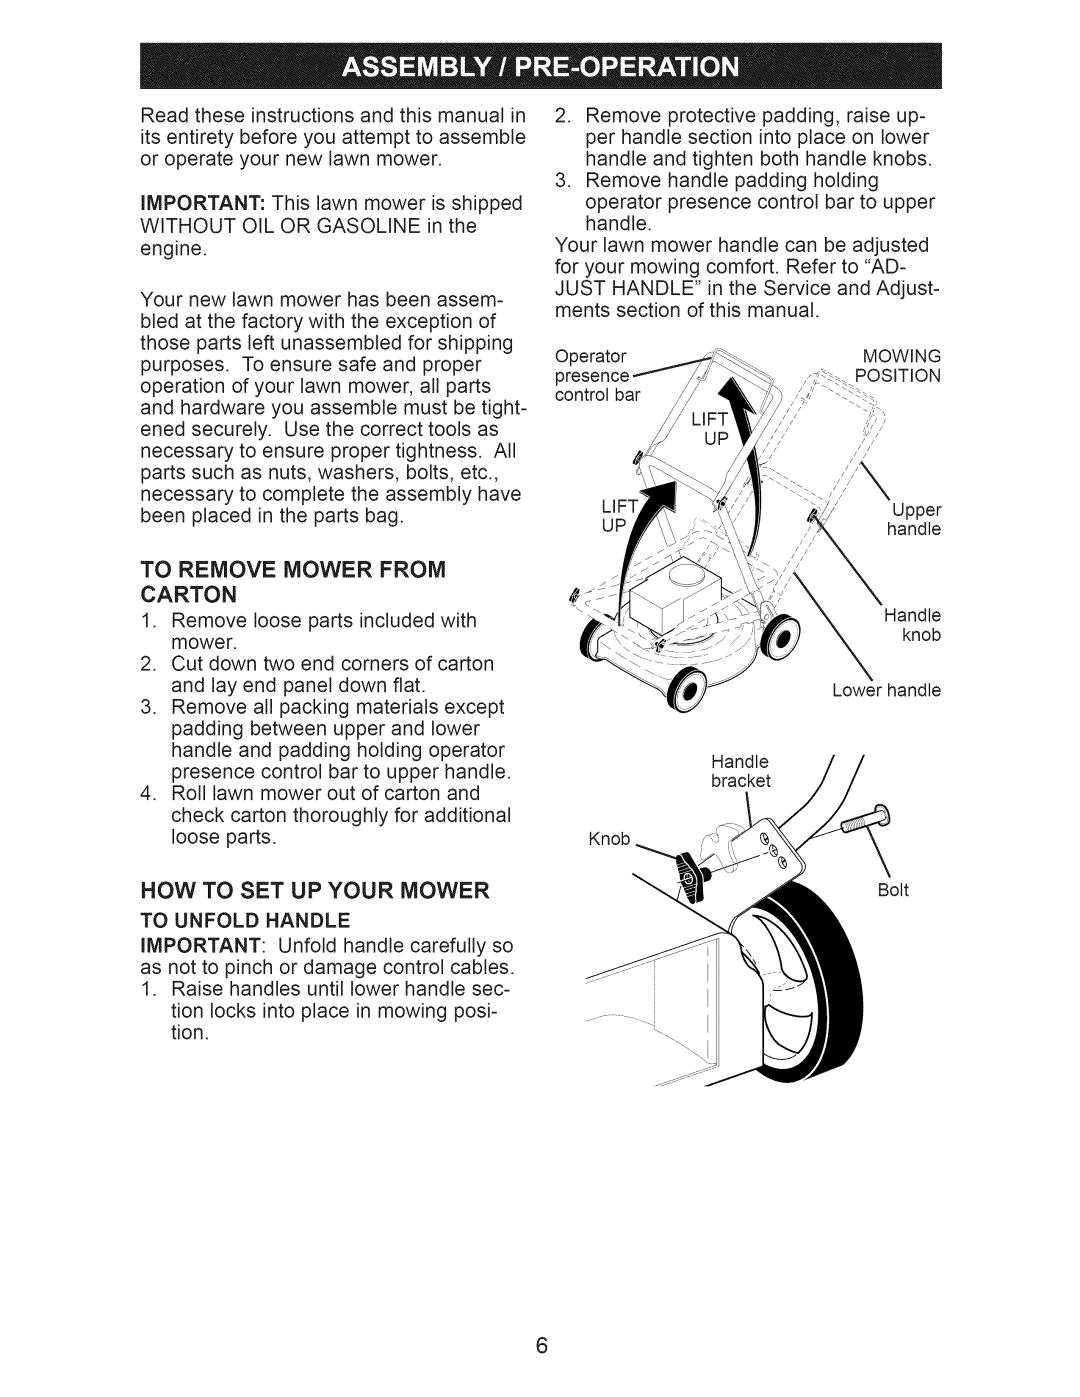 Craftsman 917.376533 owner manual Now To Set Up Your Mower, To Remove Mower From Carton 